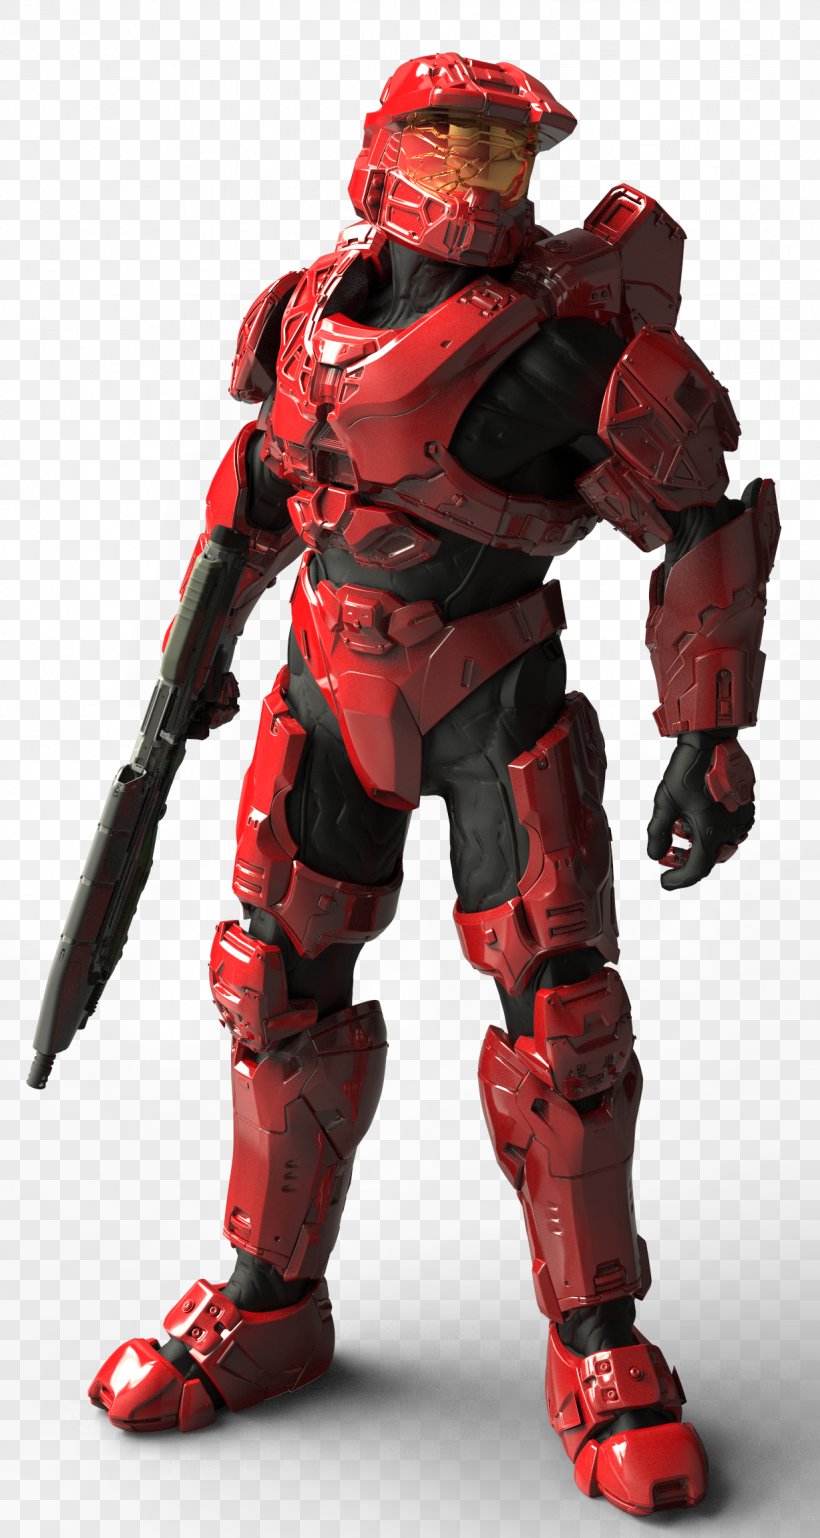 Halo 5: Guardians Halo: The Master Chief Collection Halo: Reach Halo 4 Halo: Combat Evolved, PNG, 1228x2304px, 343 Industries, Halo 5 Guardians, Achievement, Action Figure, Arbiter Download Free